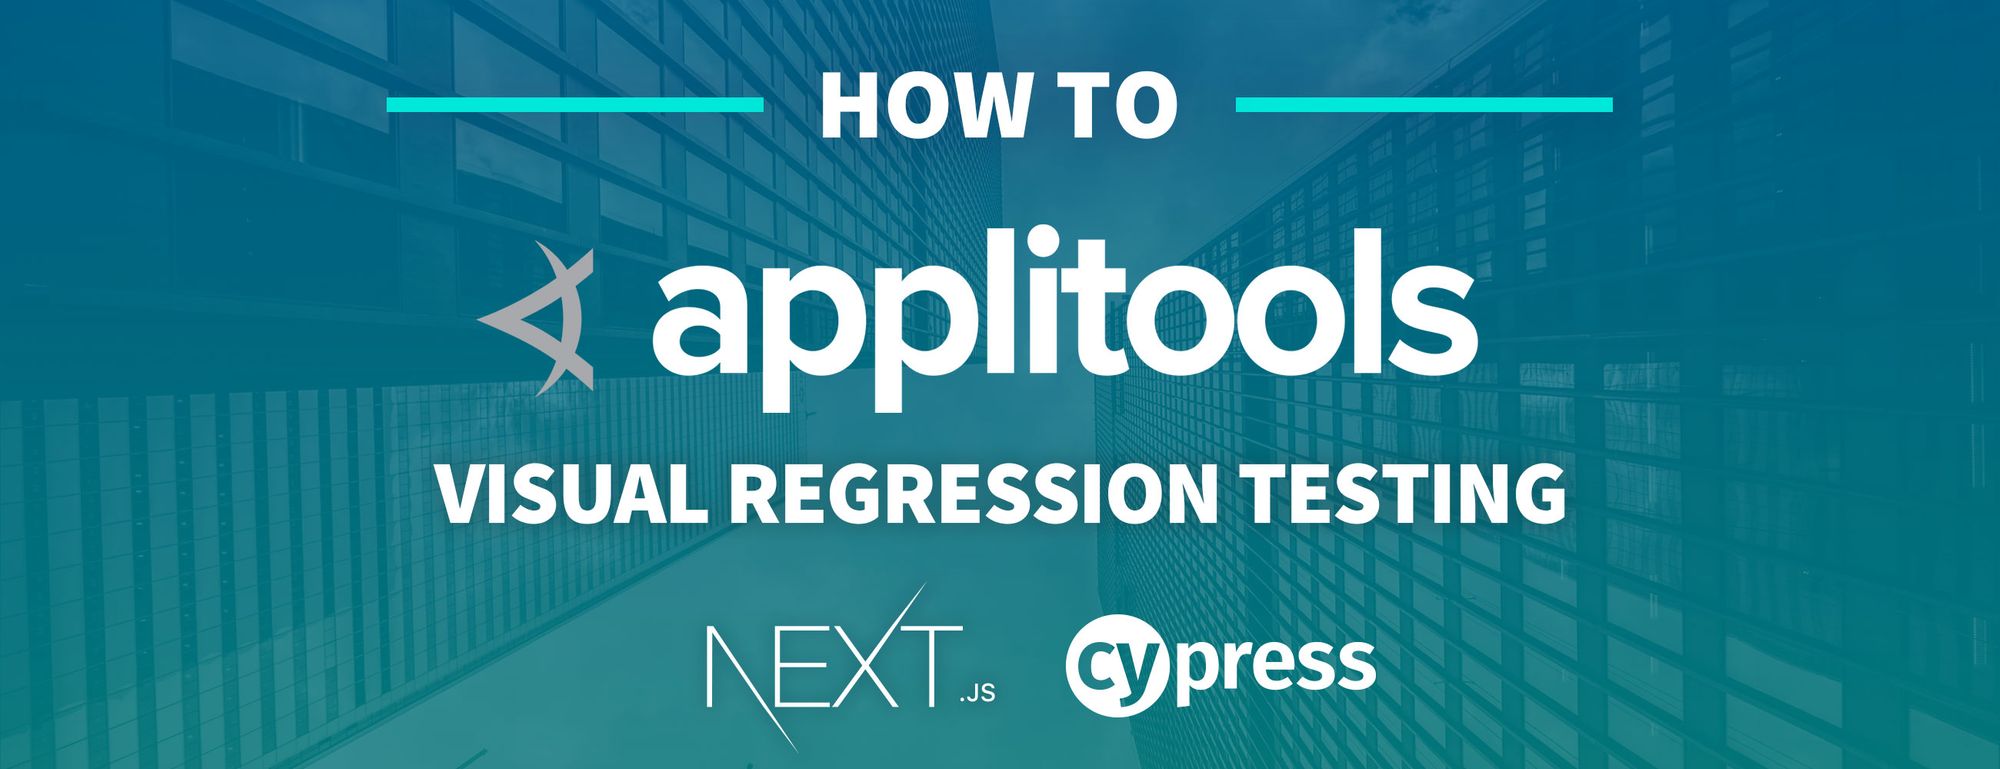 How to run Visual Regression Testing on a Next.js App with Cypress and Applitools